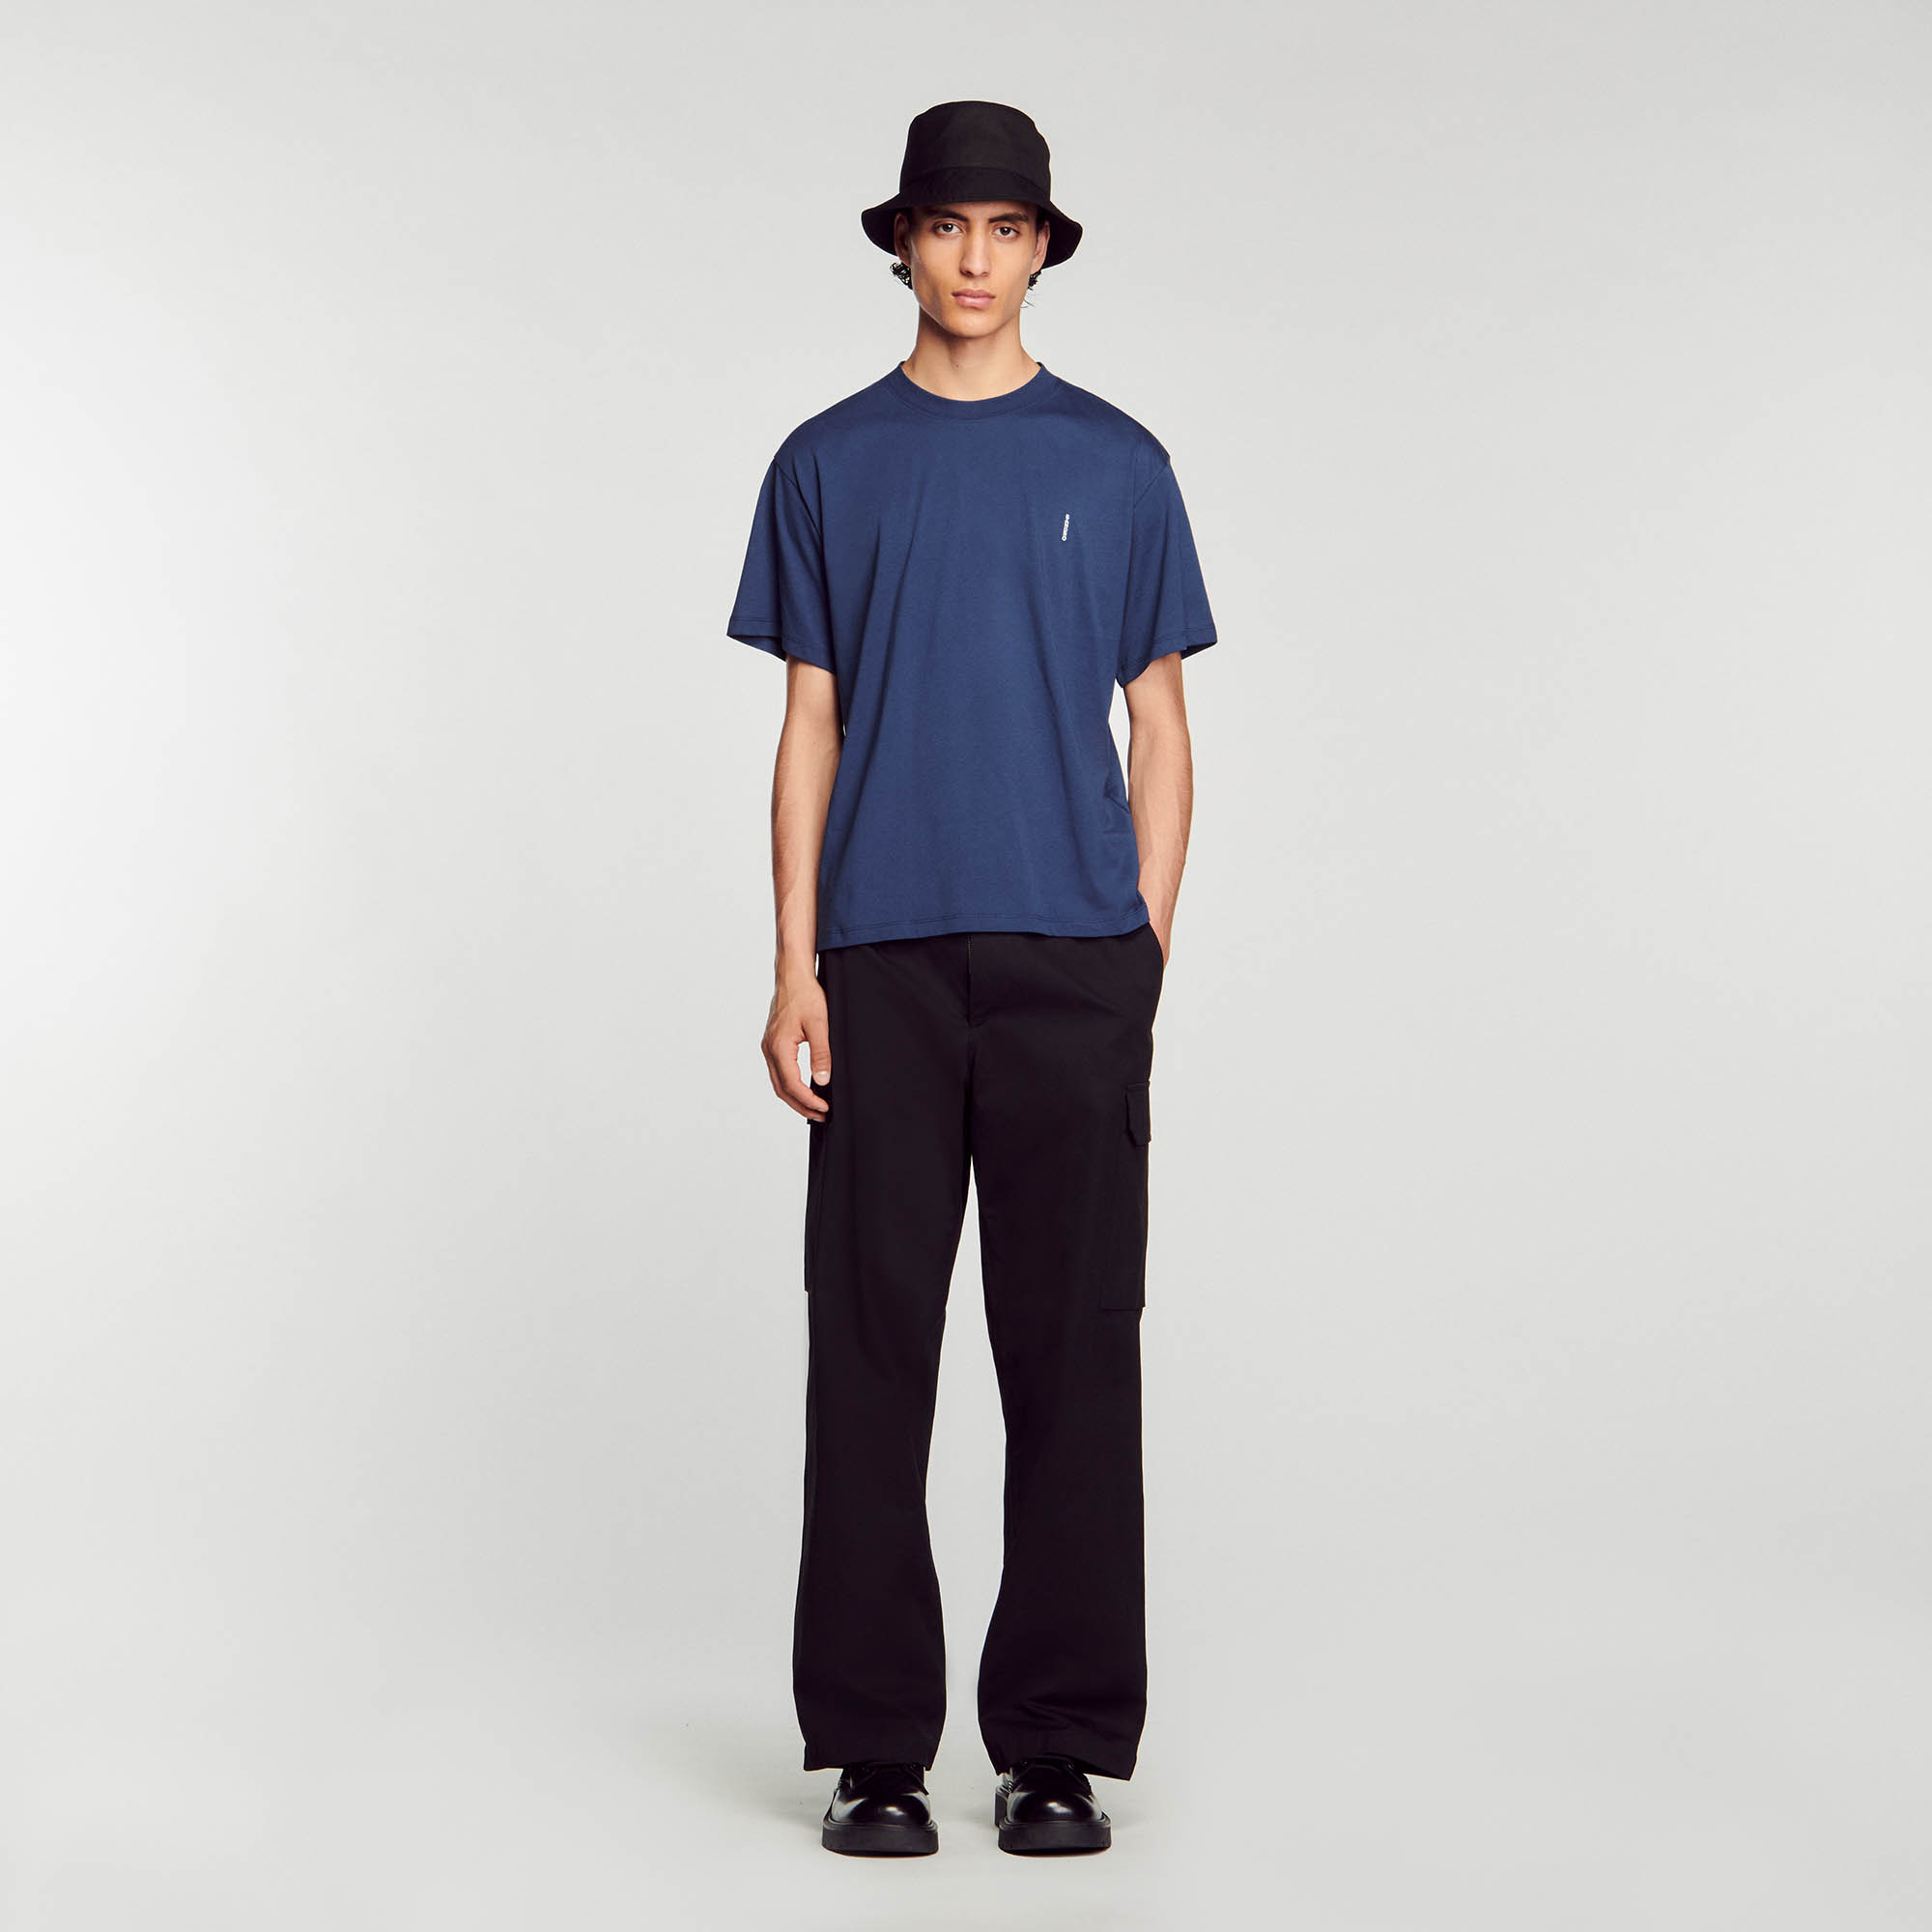 Sandro cotton Embroidery: Oversized cotton T-shirt with a round neck, short sleeves, and vertical Sandro embroidery